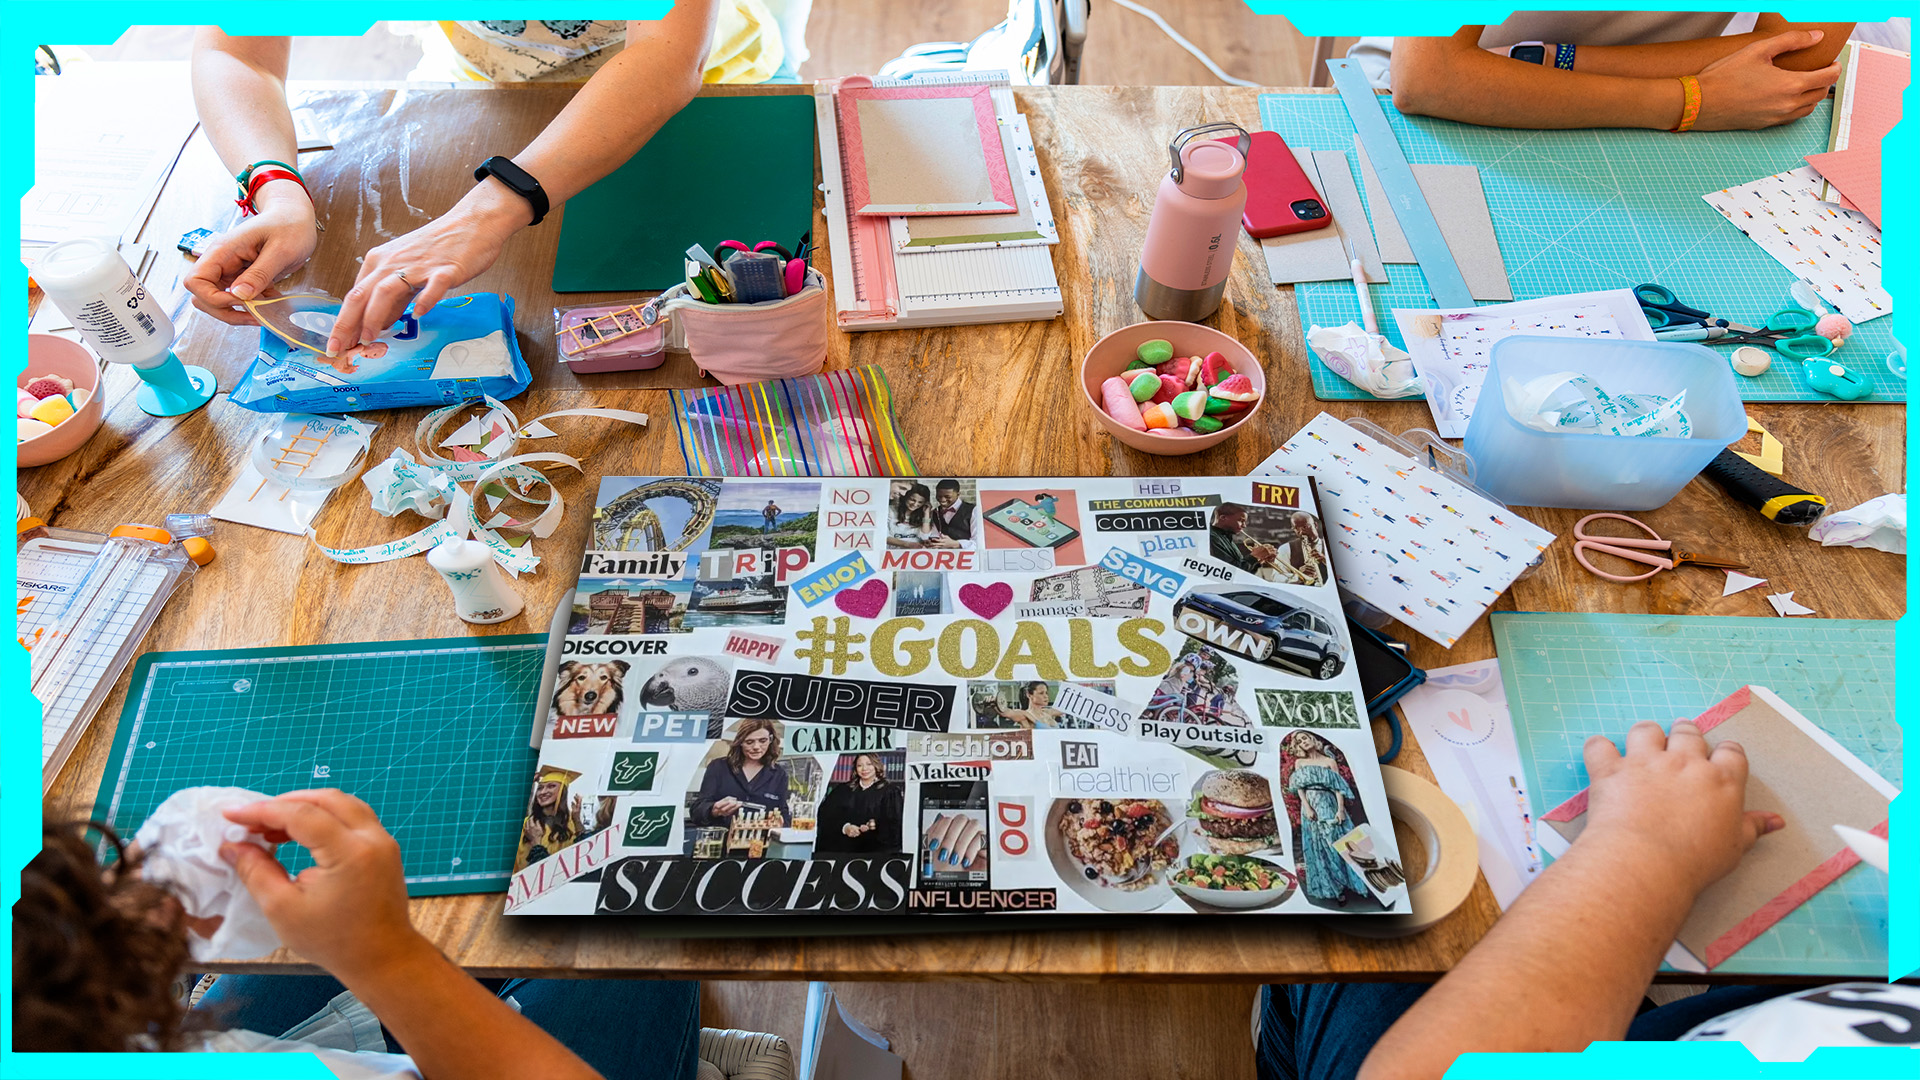 A diverse group of people sitting around a large table, creating vision boards with magazines, scissors, glue, and colorful markers.